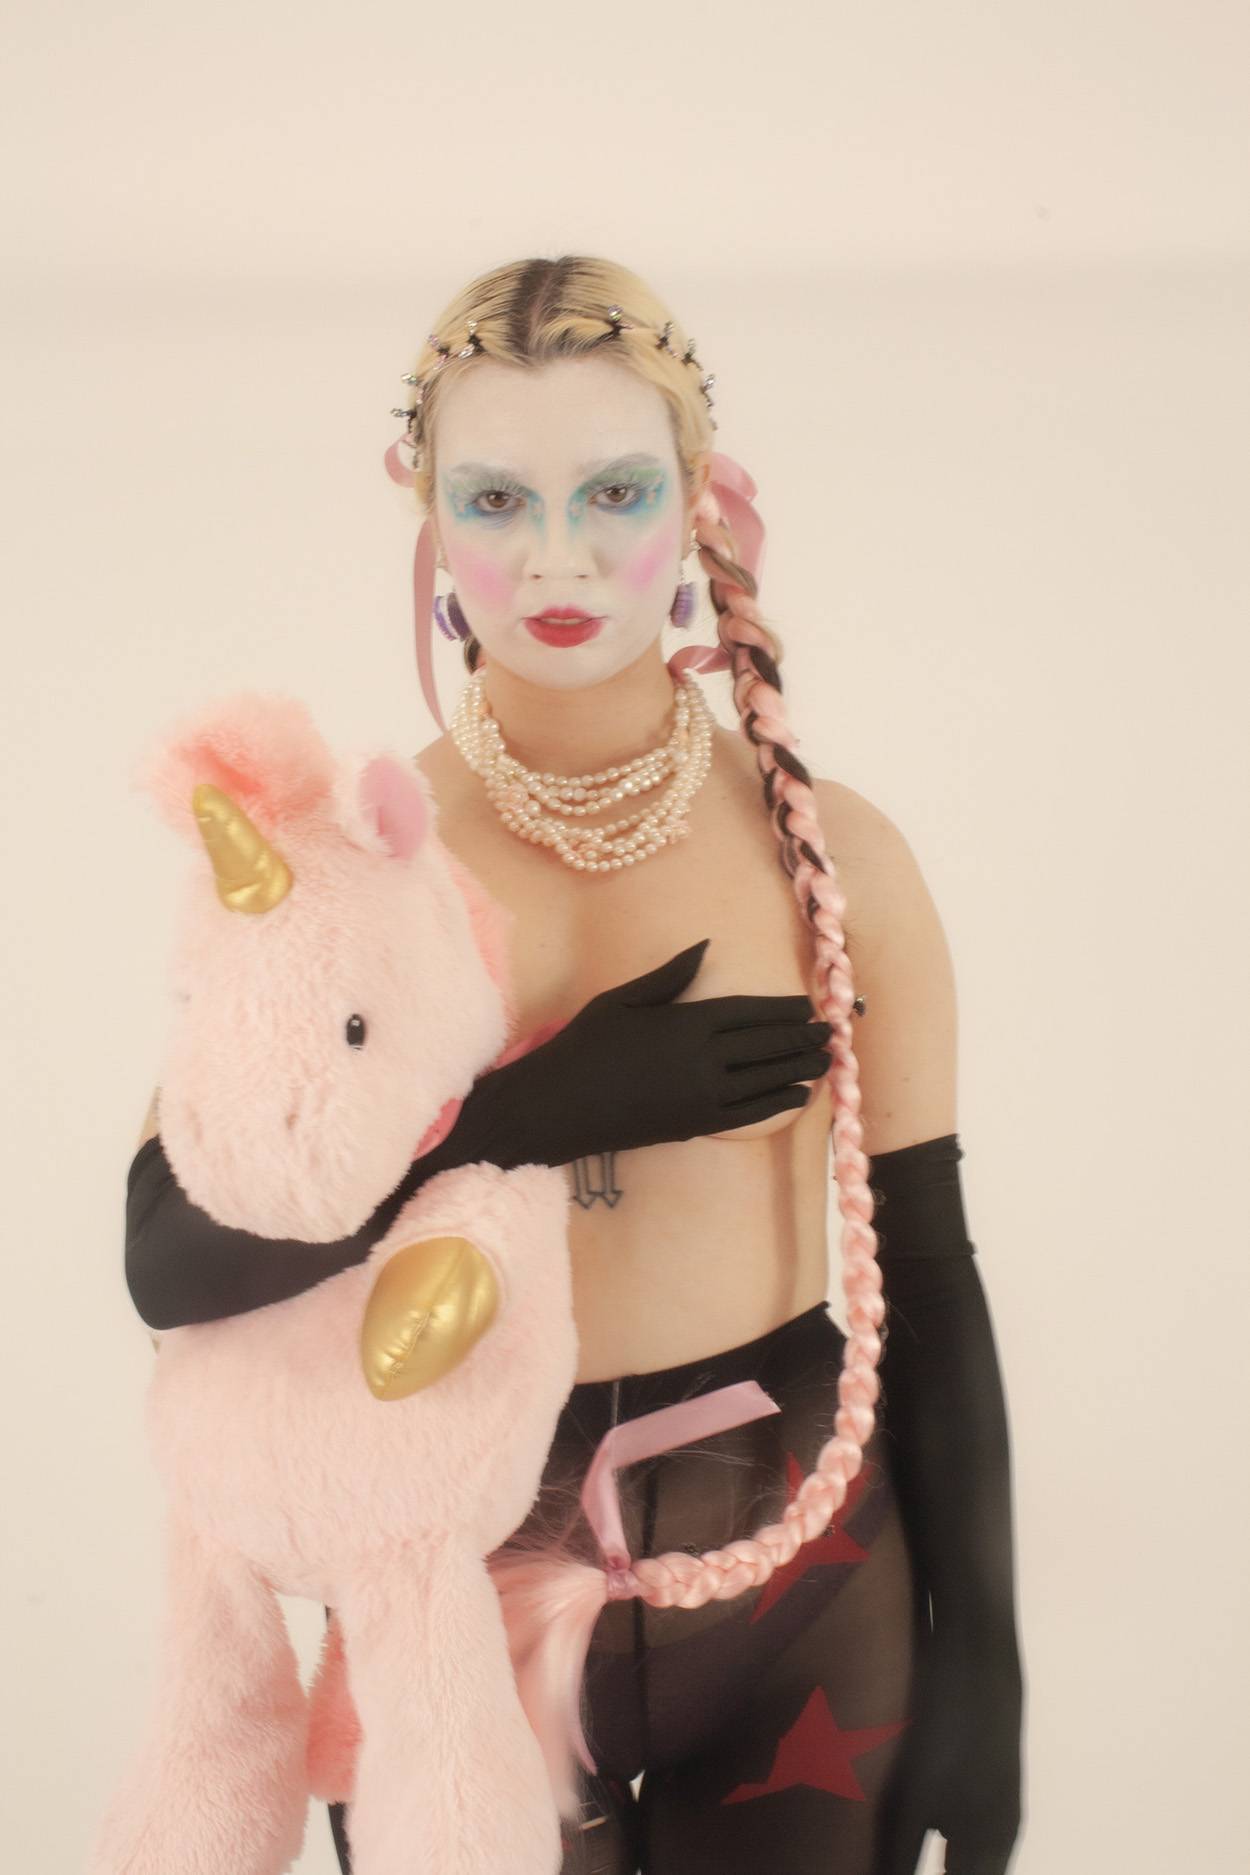 Photo of model holding unicorn soft toy from the series Modern Club Kids. Styling creative direction and photography by Grace Clayton, Makeup and Hair by Lucy Amos.